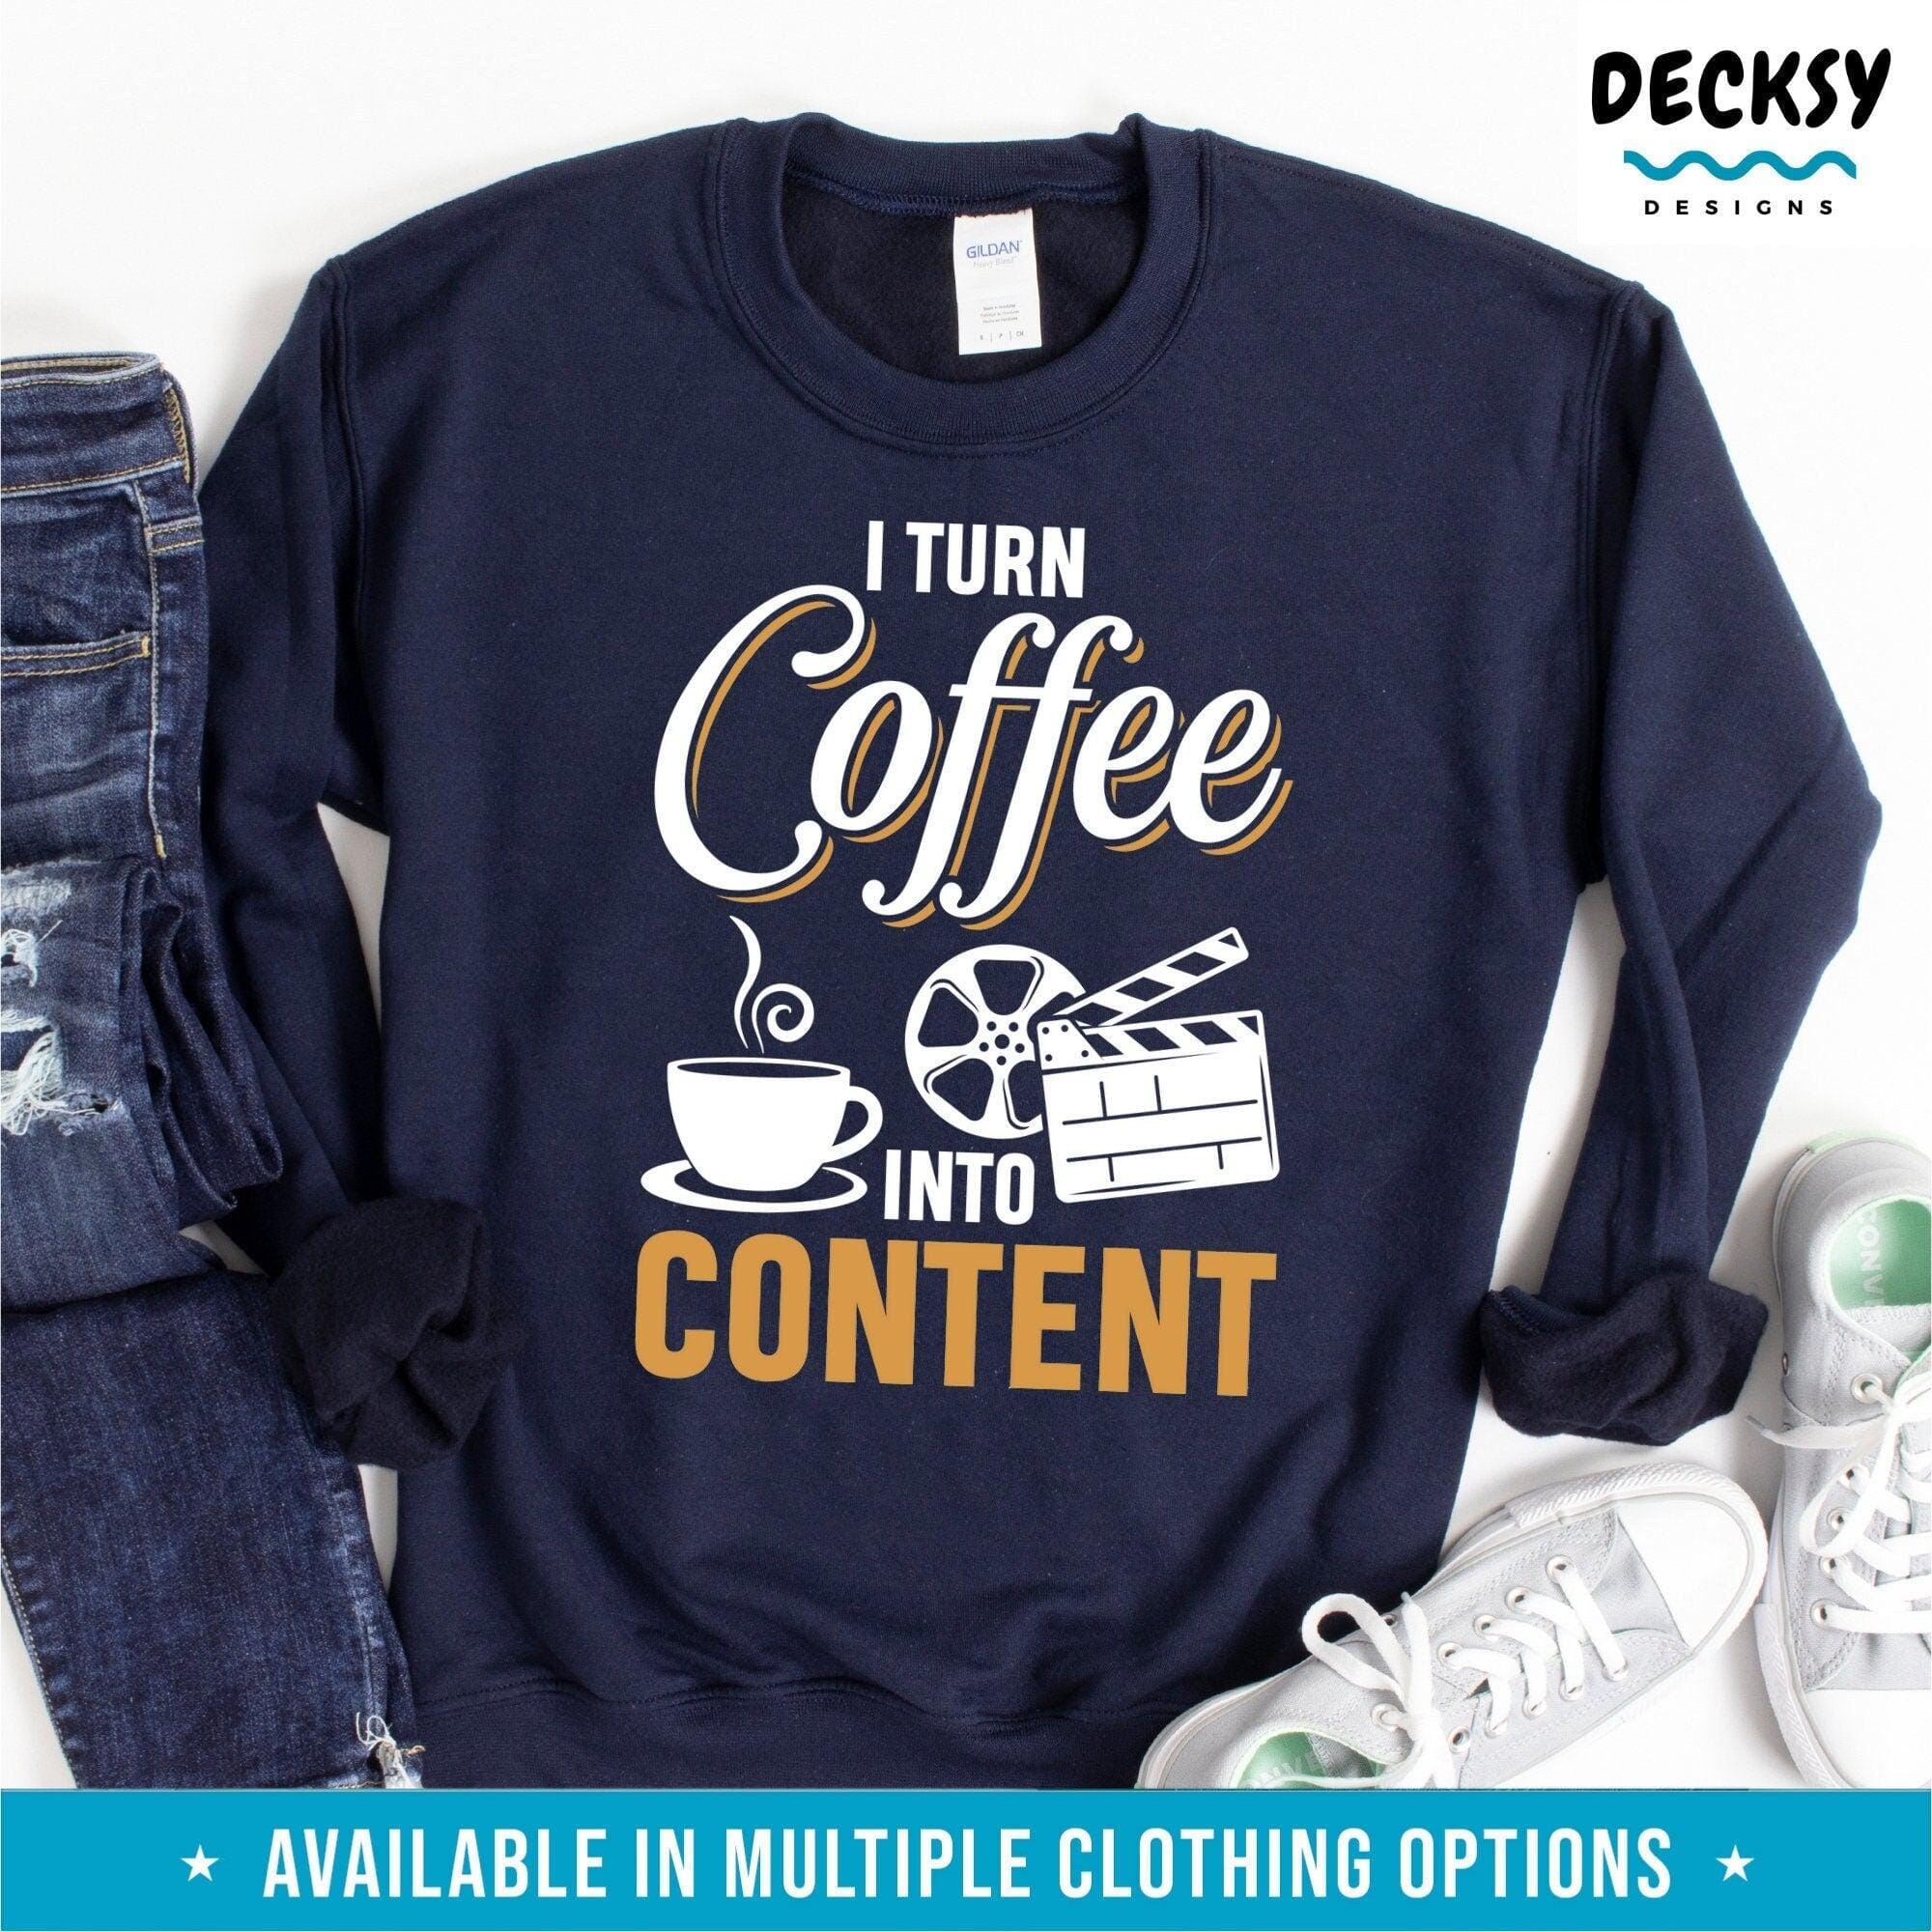 Video Content Creator Shirt, Gift for Influencer-Clothing:Gender-Neutral Adult Clothing:Tops & Tees:T-shirts:Graphic Tees-DecksyDesigns